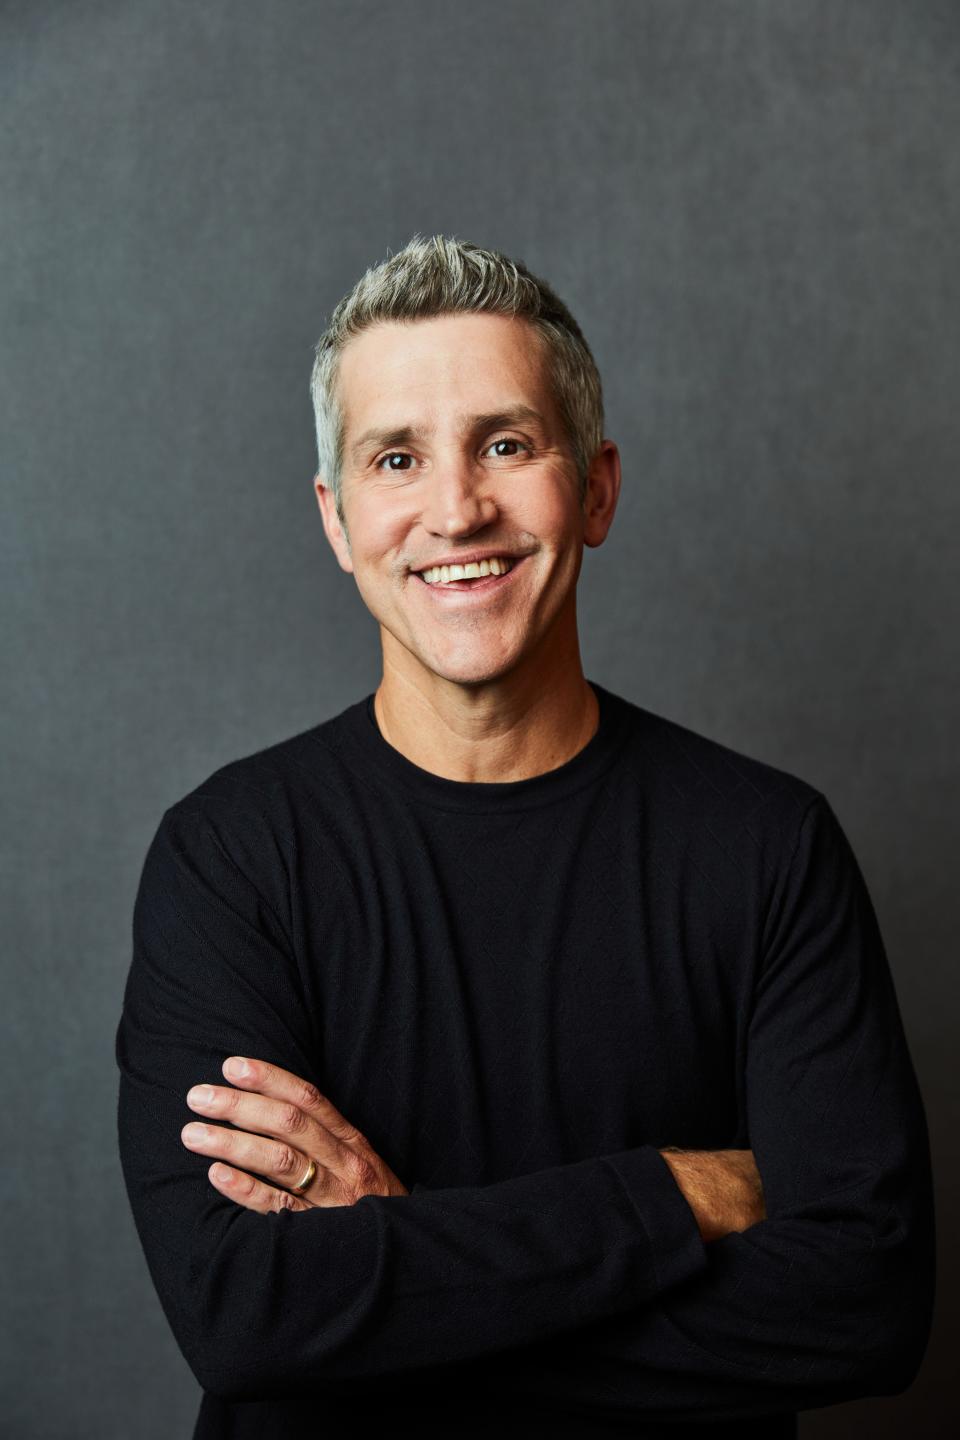 Jon Acuff is the keynote speaker for the 2023 Leadership Summit in Sioux Falls.